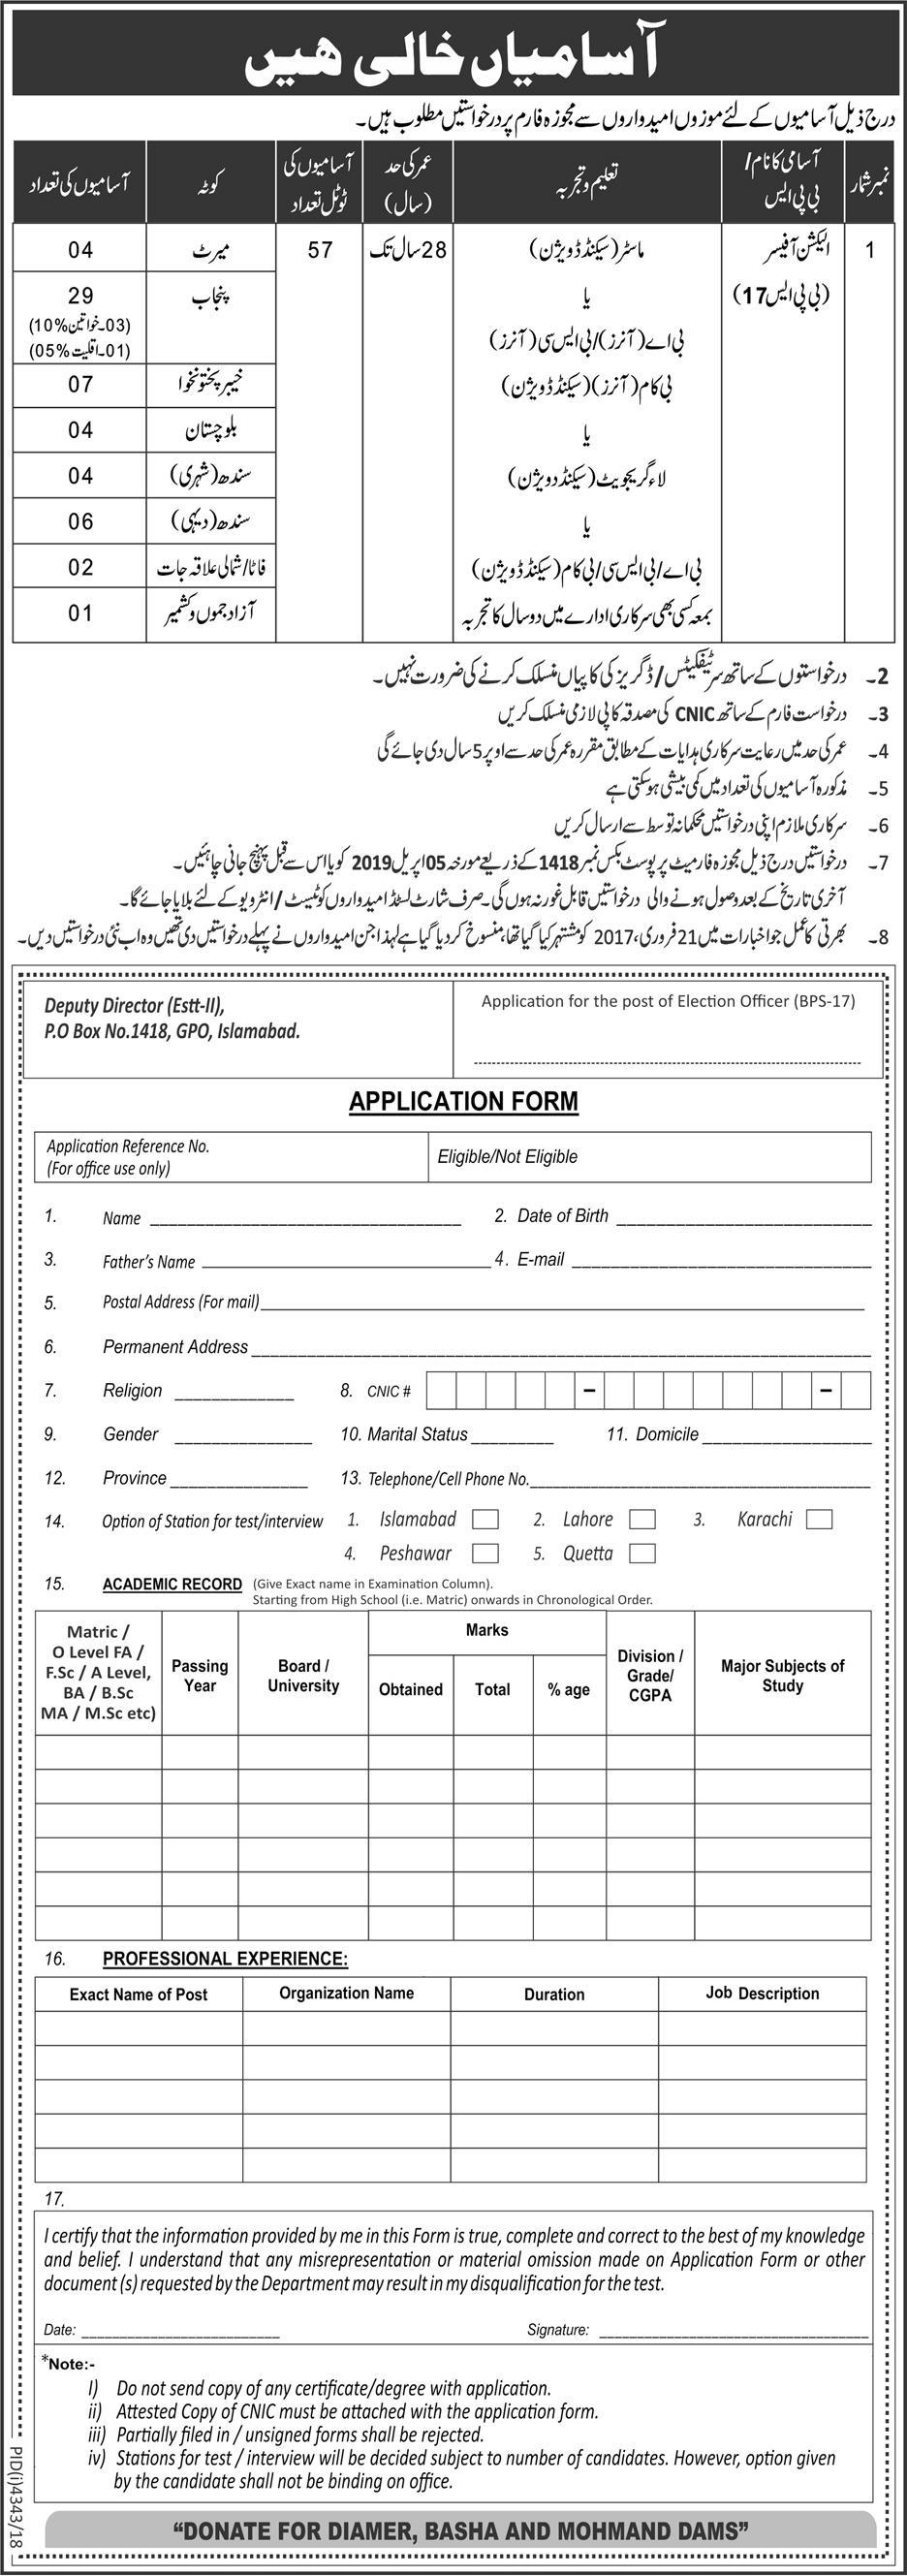 Election Commission of Pakistan (ECP) jobs 2019